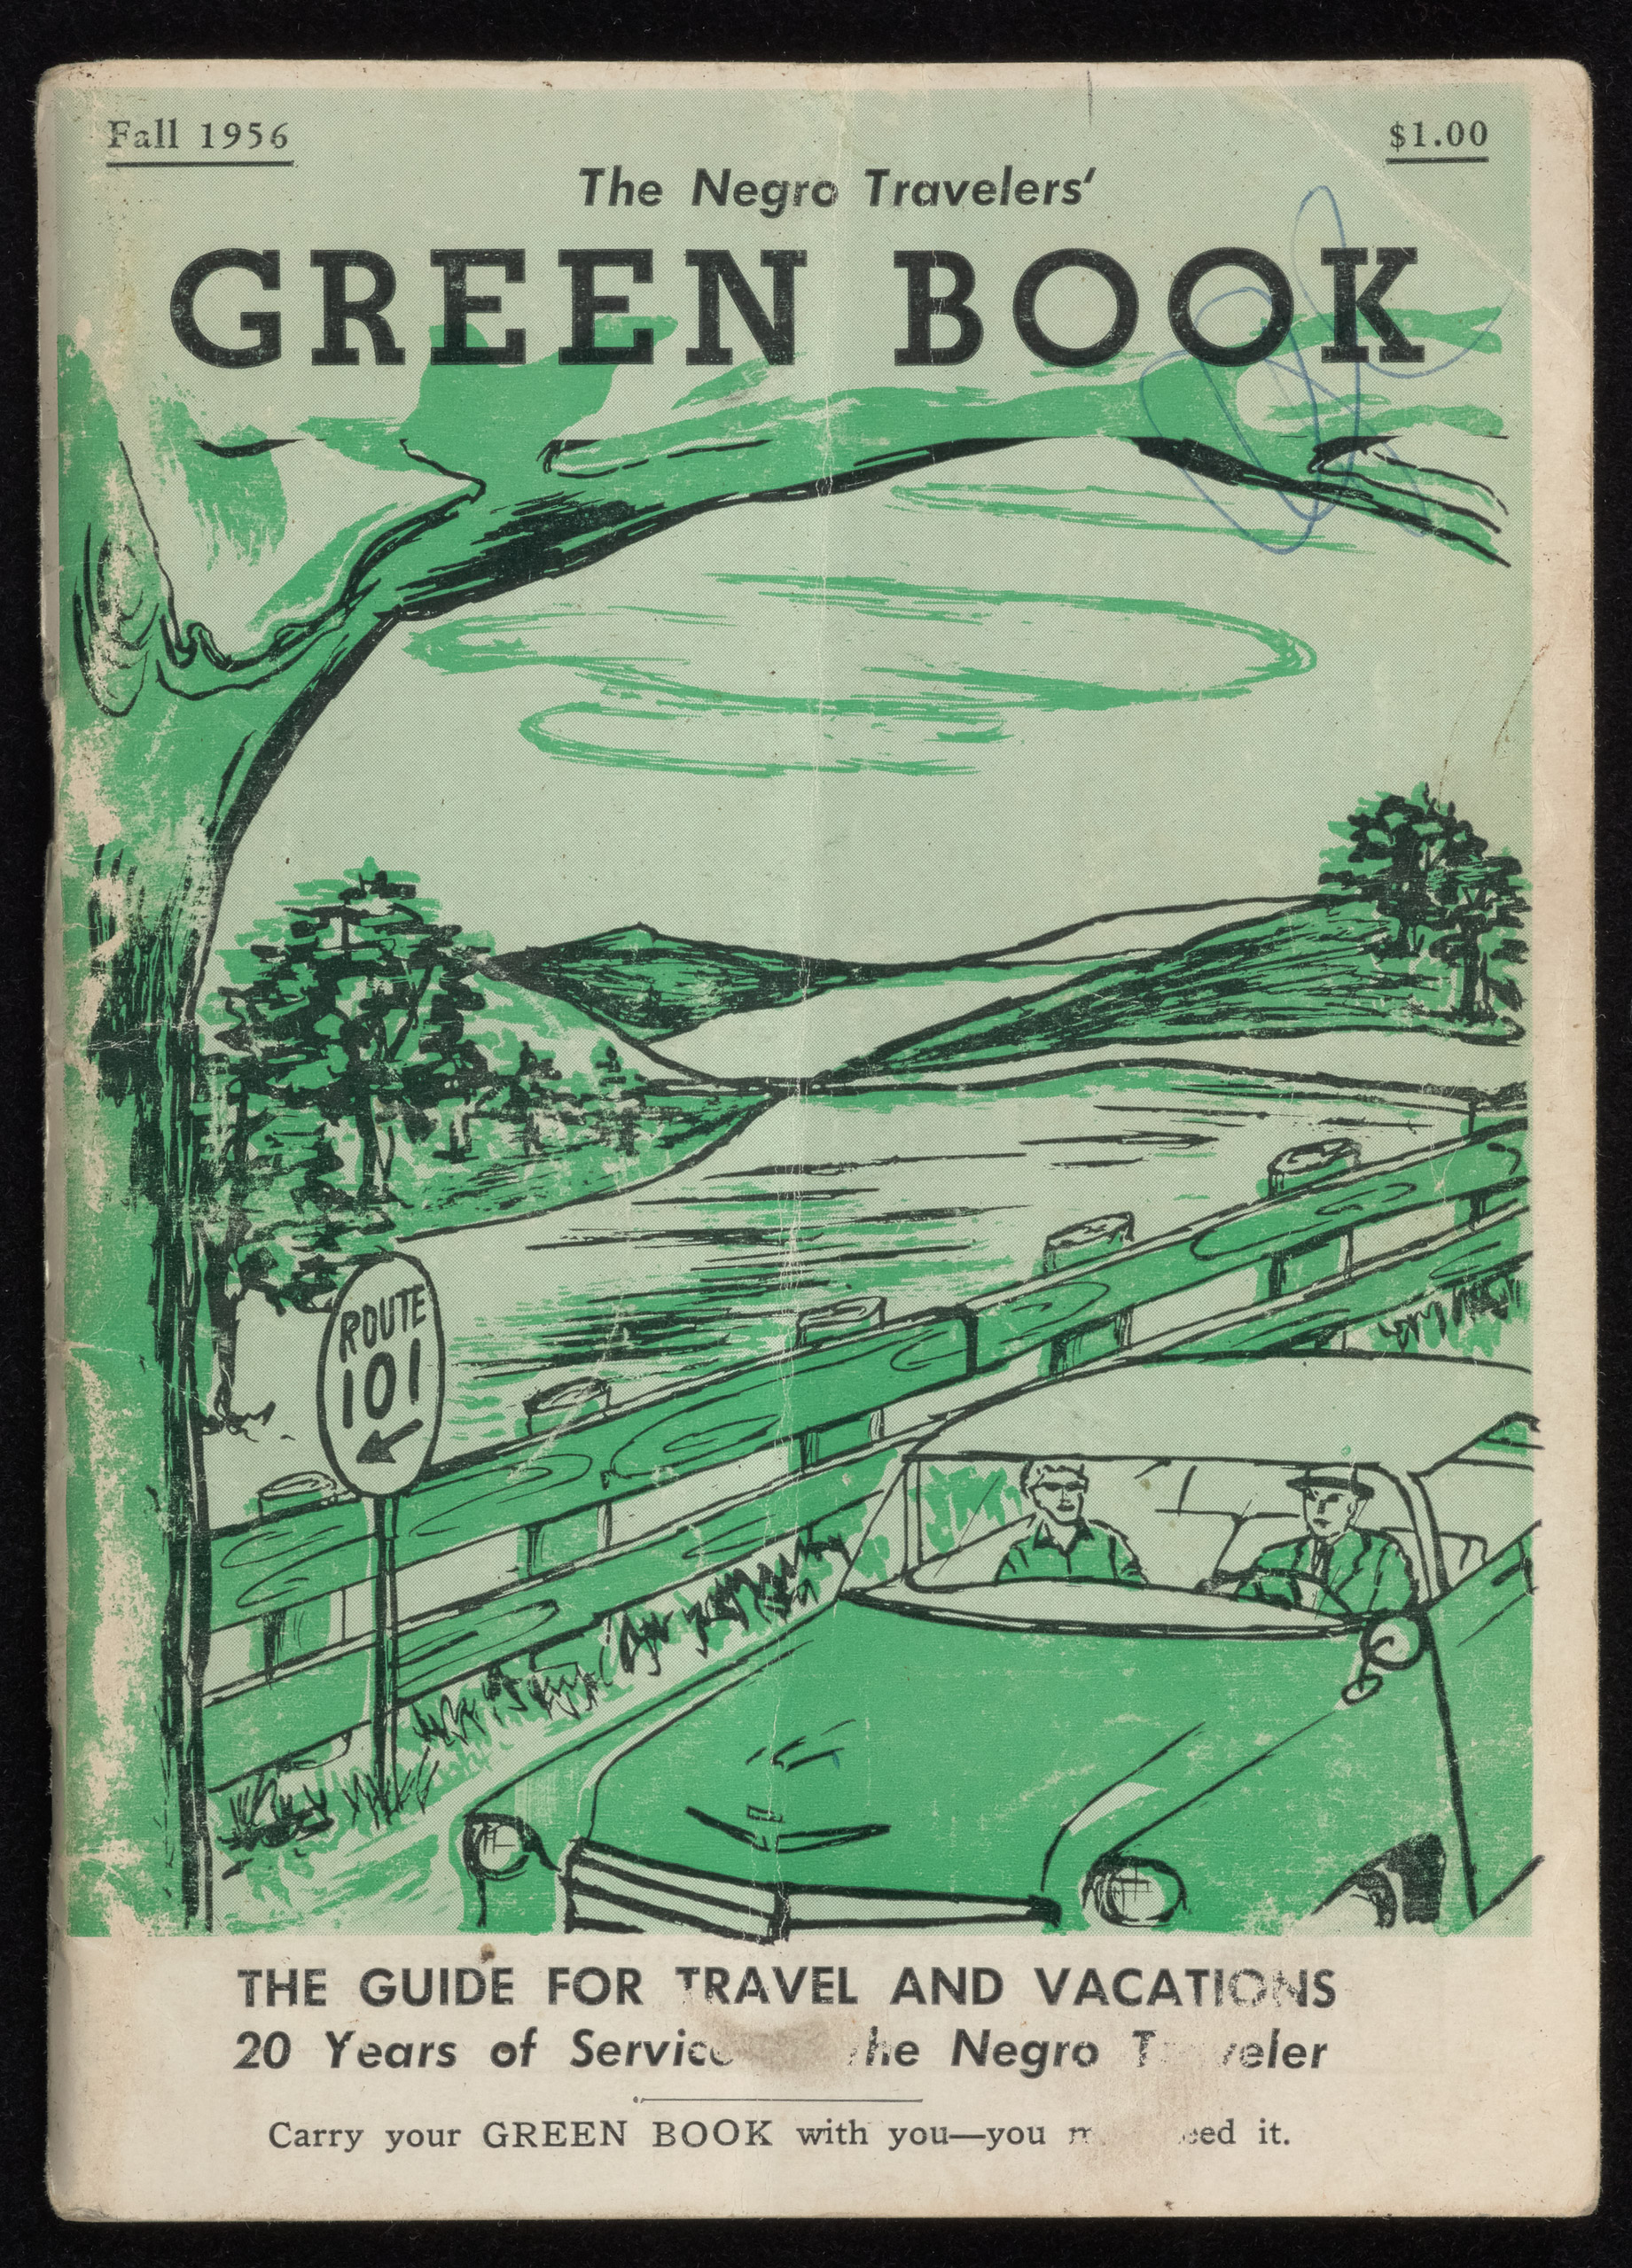 The Travelers' Green Book: 1956.